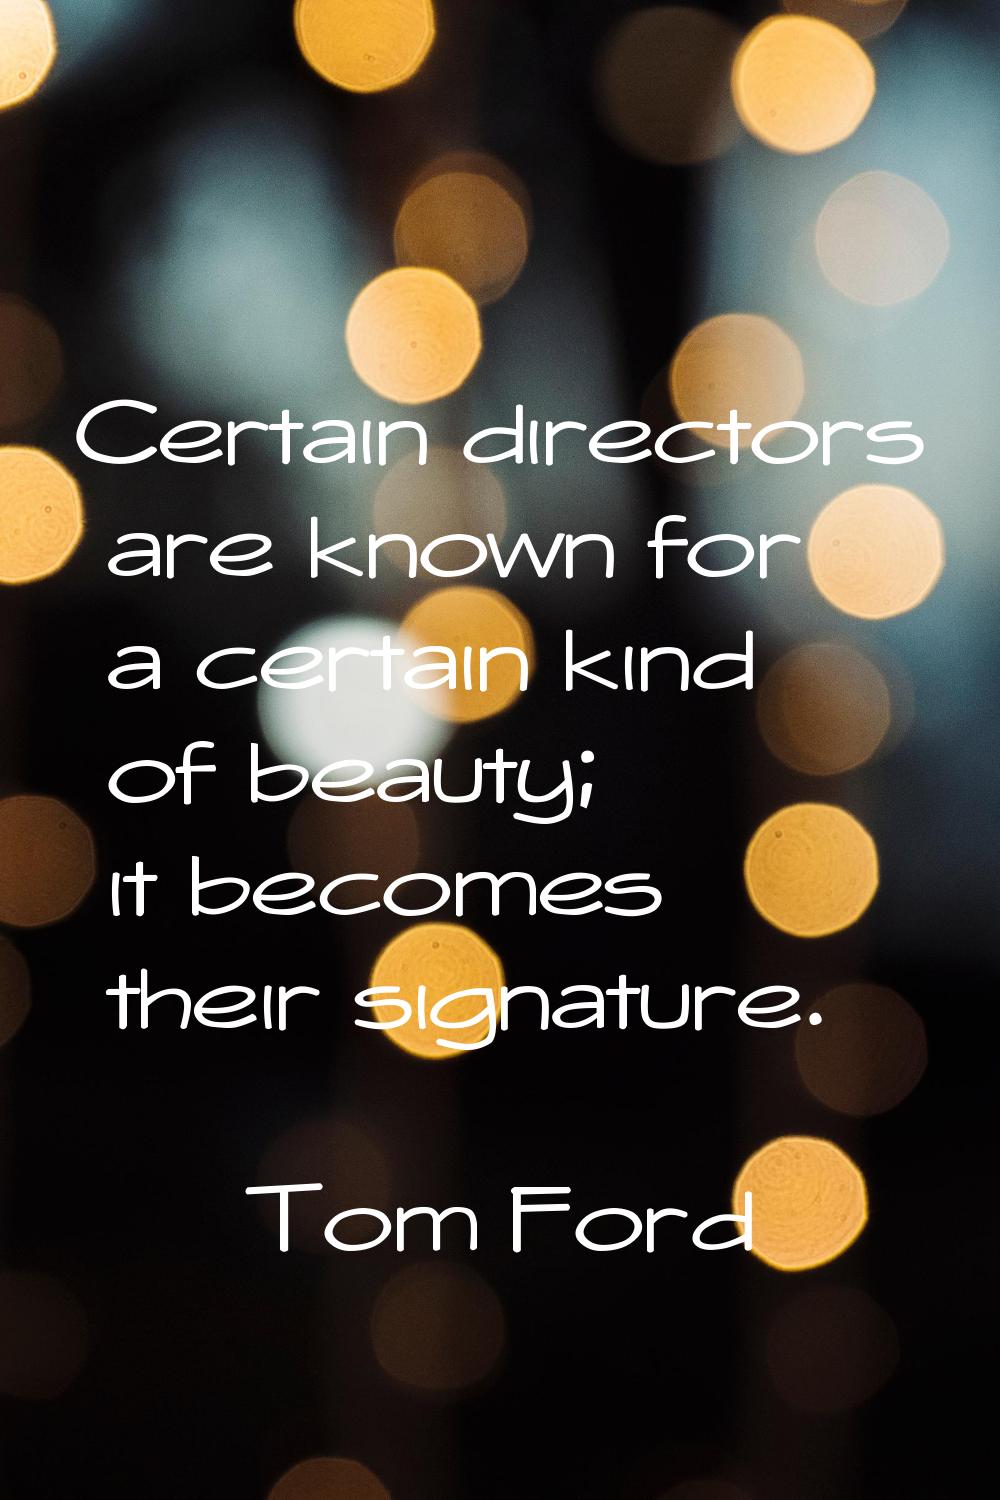 Certain directors are known for a certain kind of beauty; it becomes their signature.